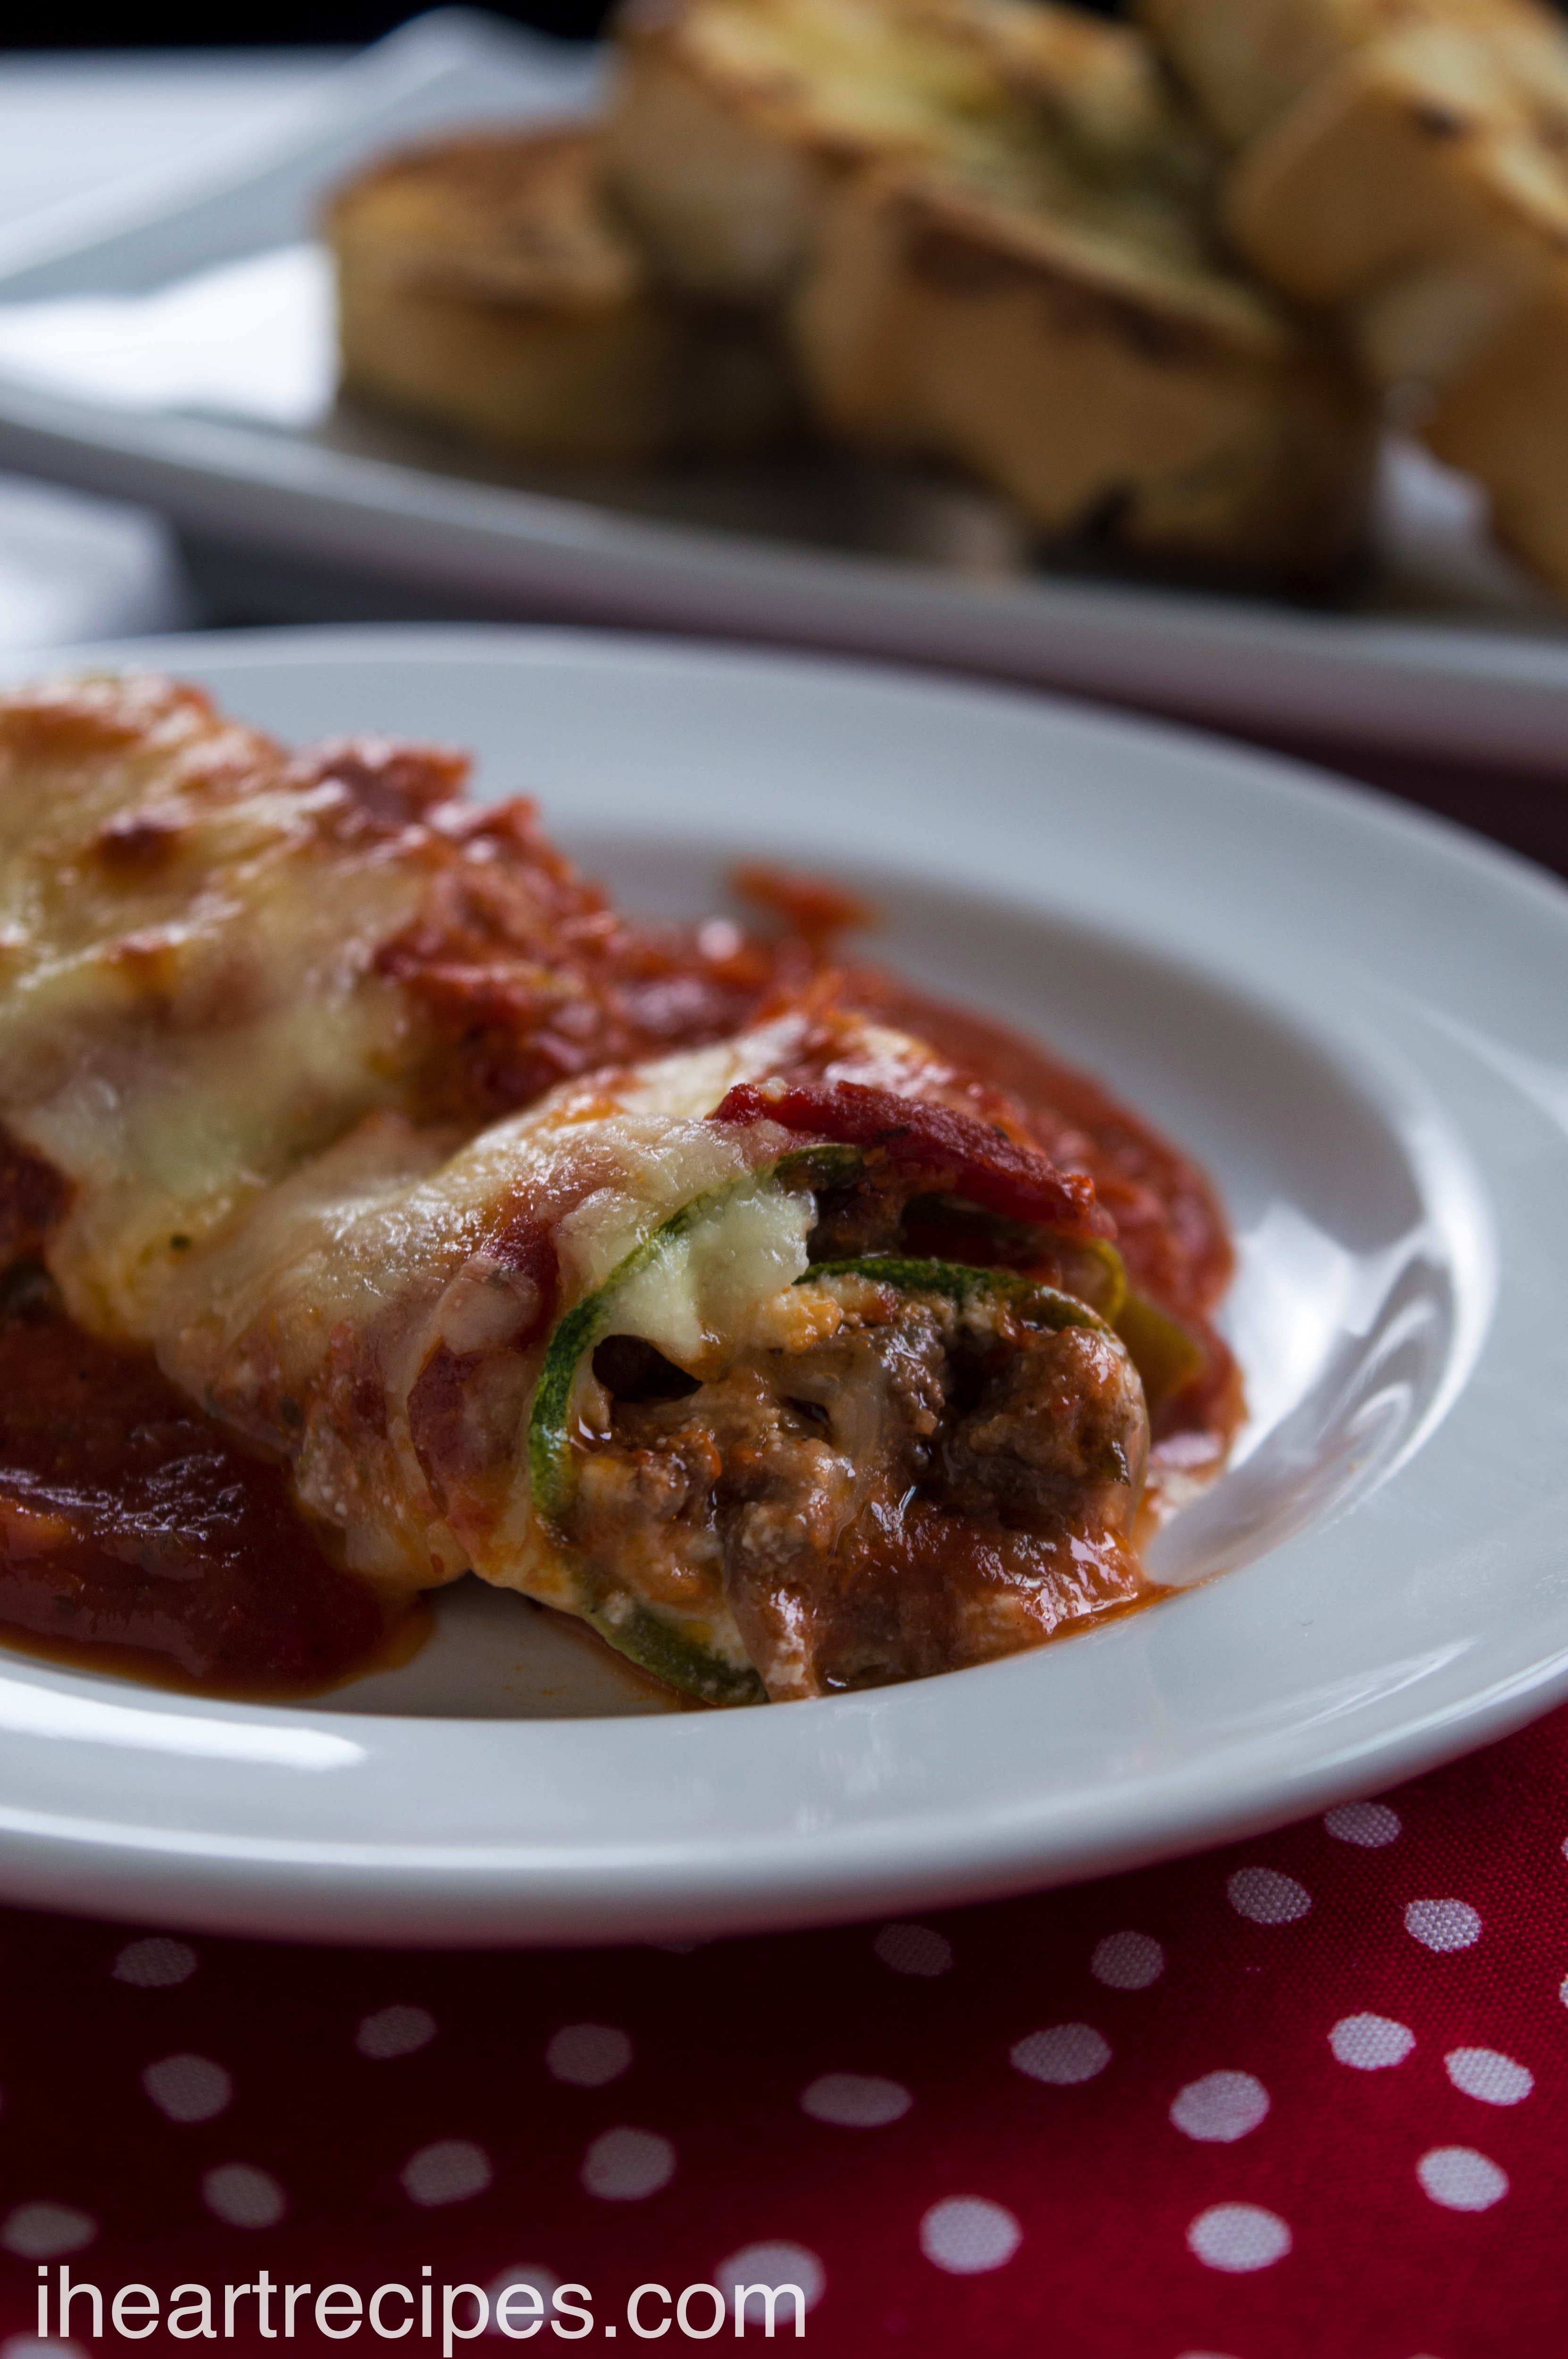 This low carb Zucchini Lasagna Roll recipe is packed with flavor